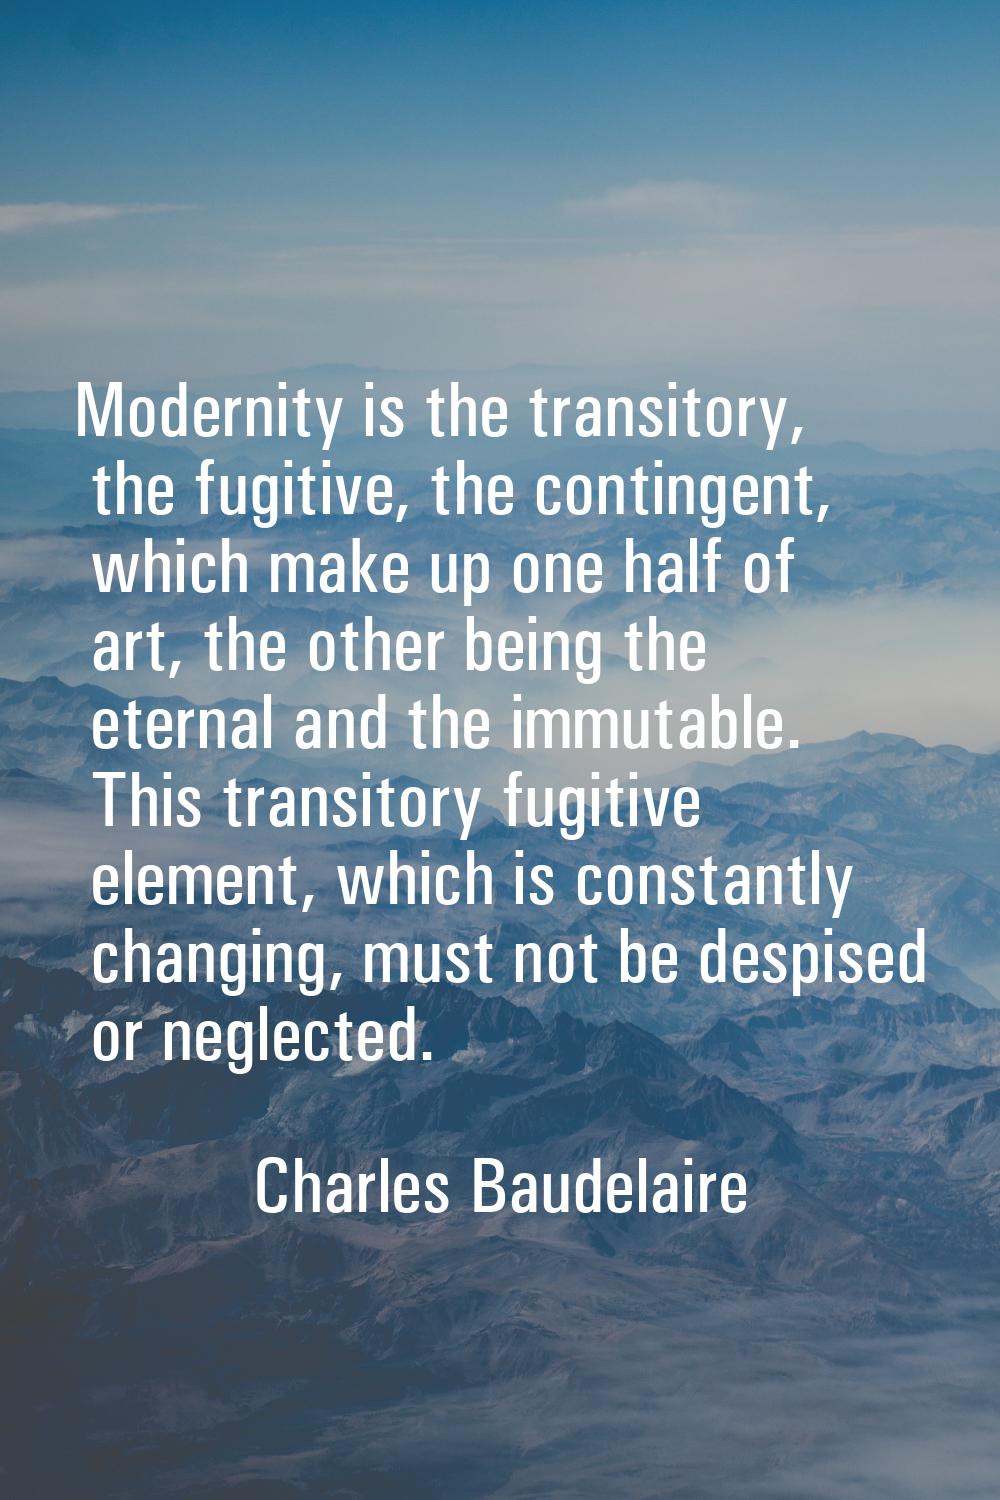 Modernity is the transitory, the fugitive, the contingent, which make up one half of art, the other